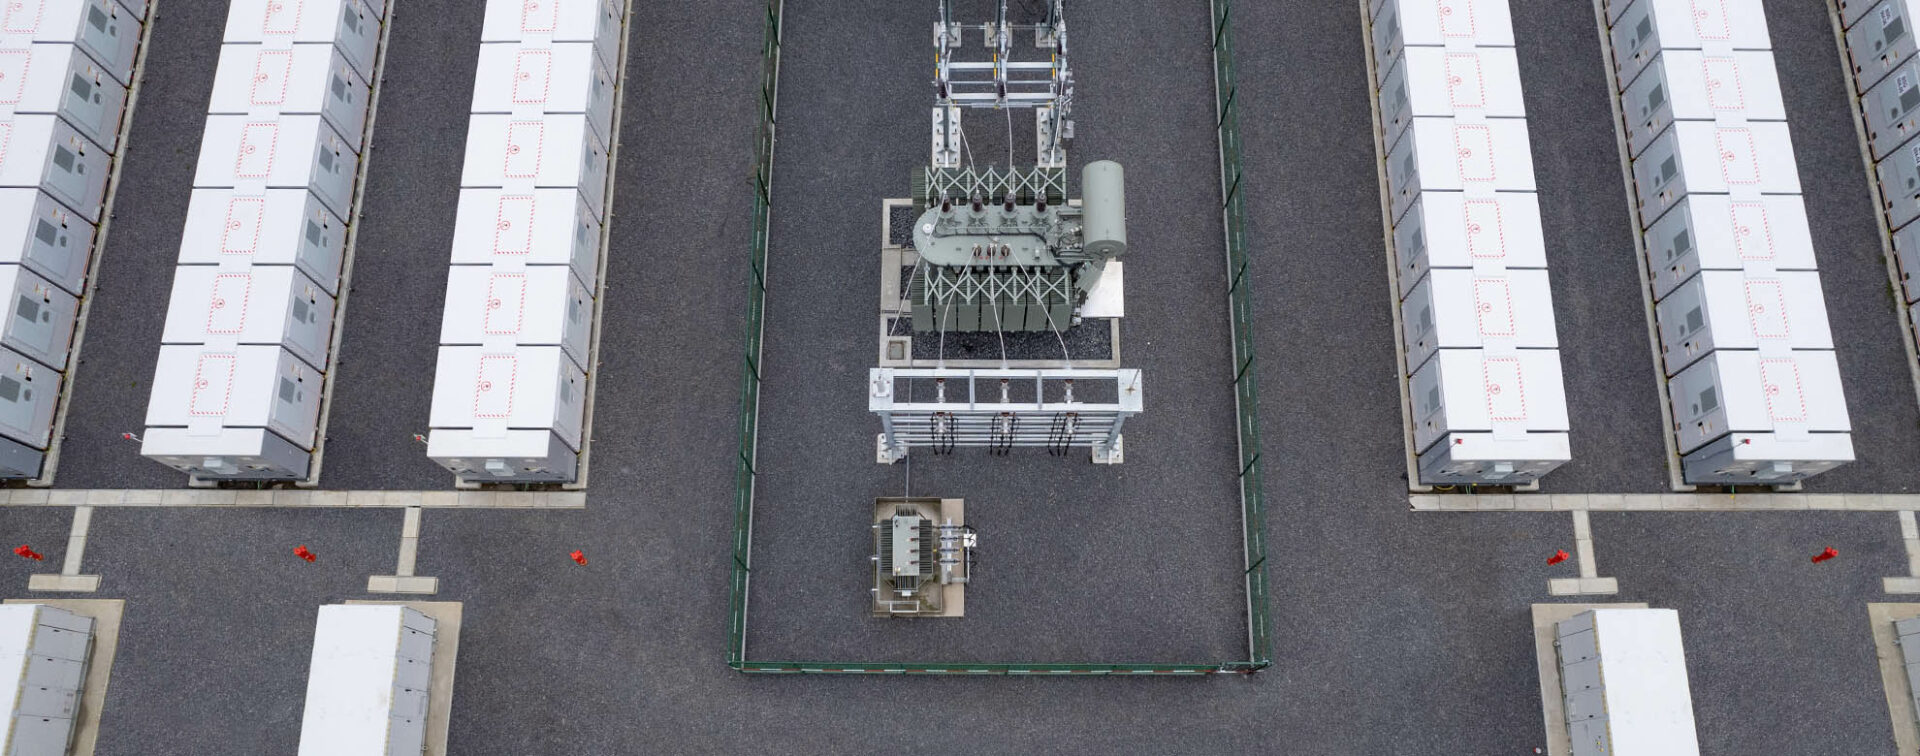 Battery energy storage system, aerial view; in the center a transformer station and electrical cables.